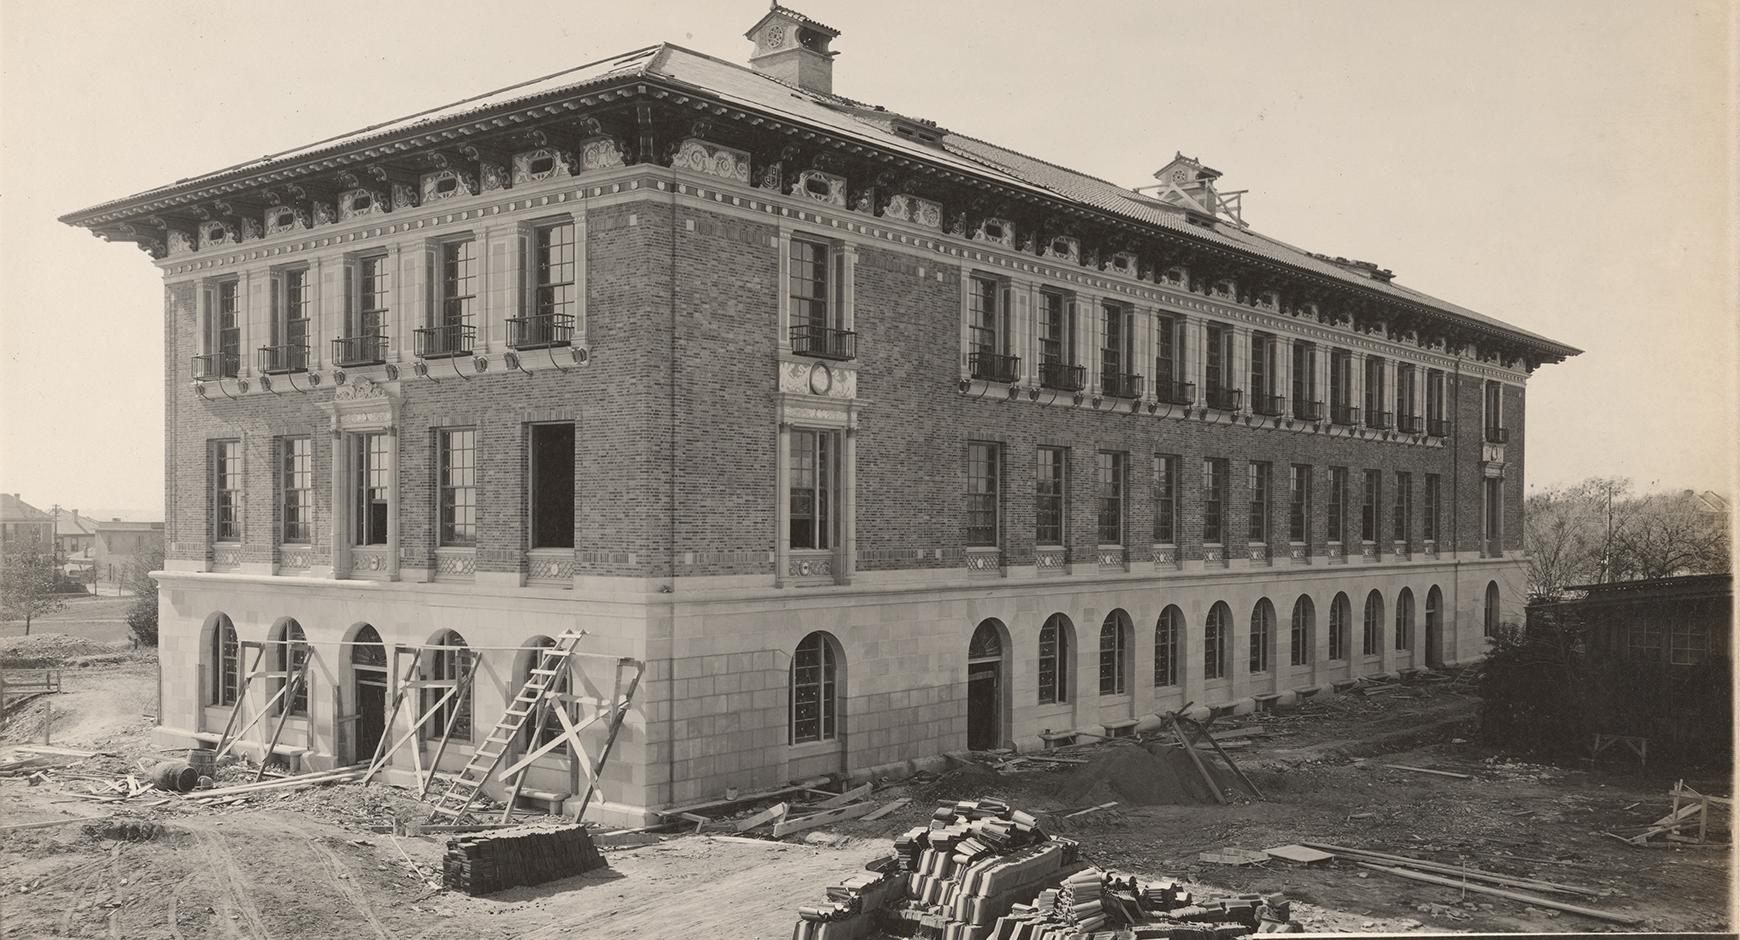 historic photo of sutton hall, designed in the Spanish Renaissance style. Architect: Cass Gilbert, 1915-1918